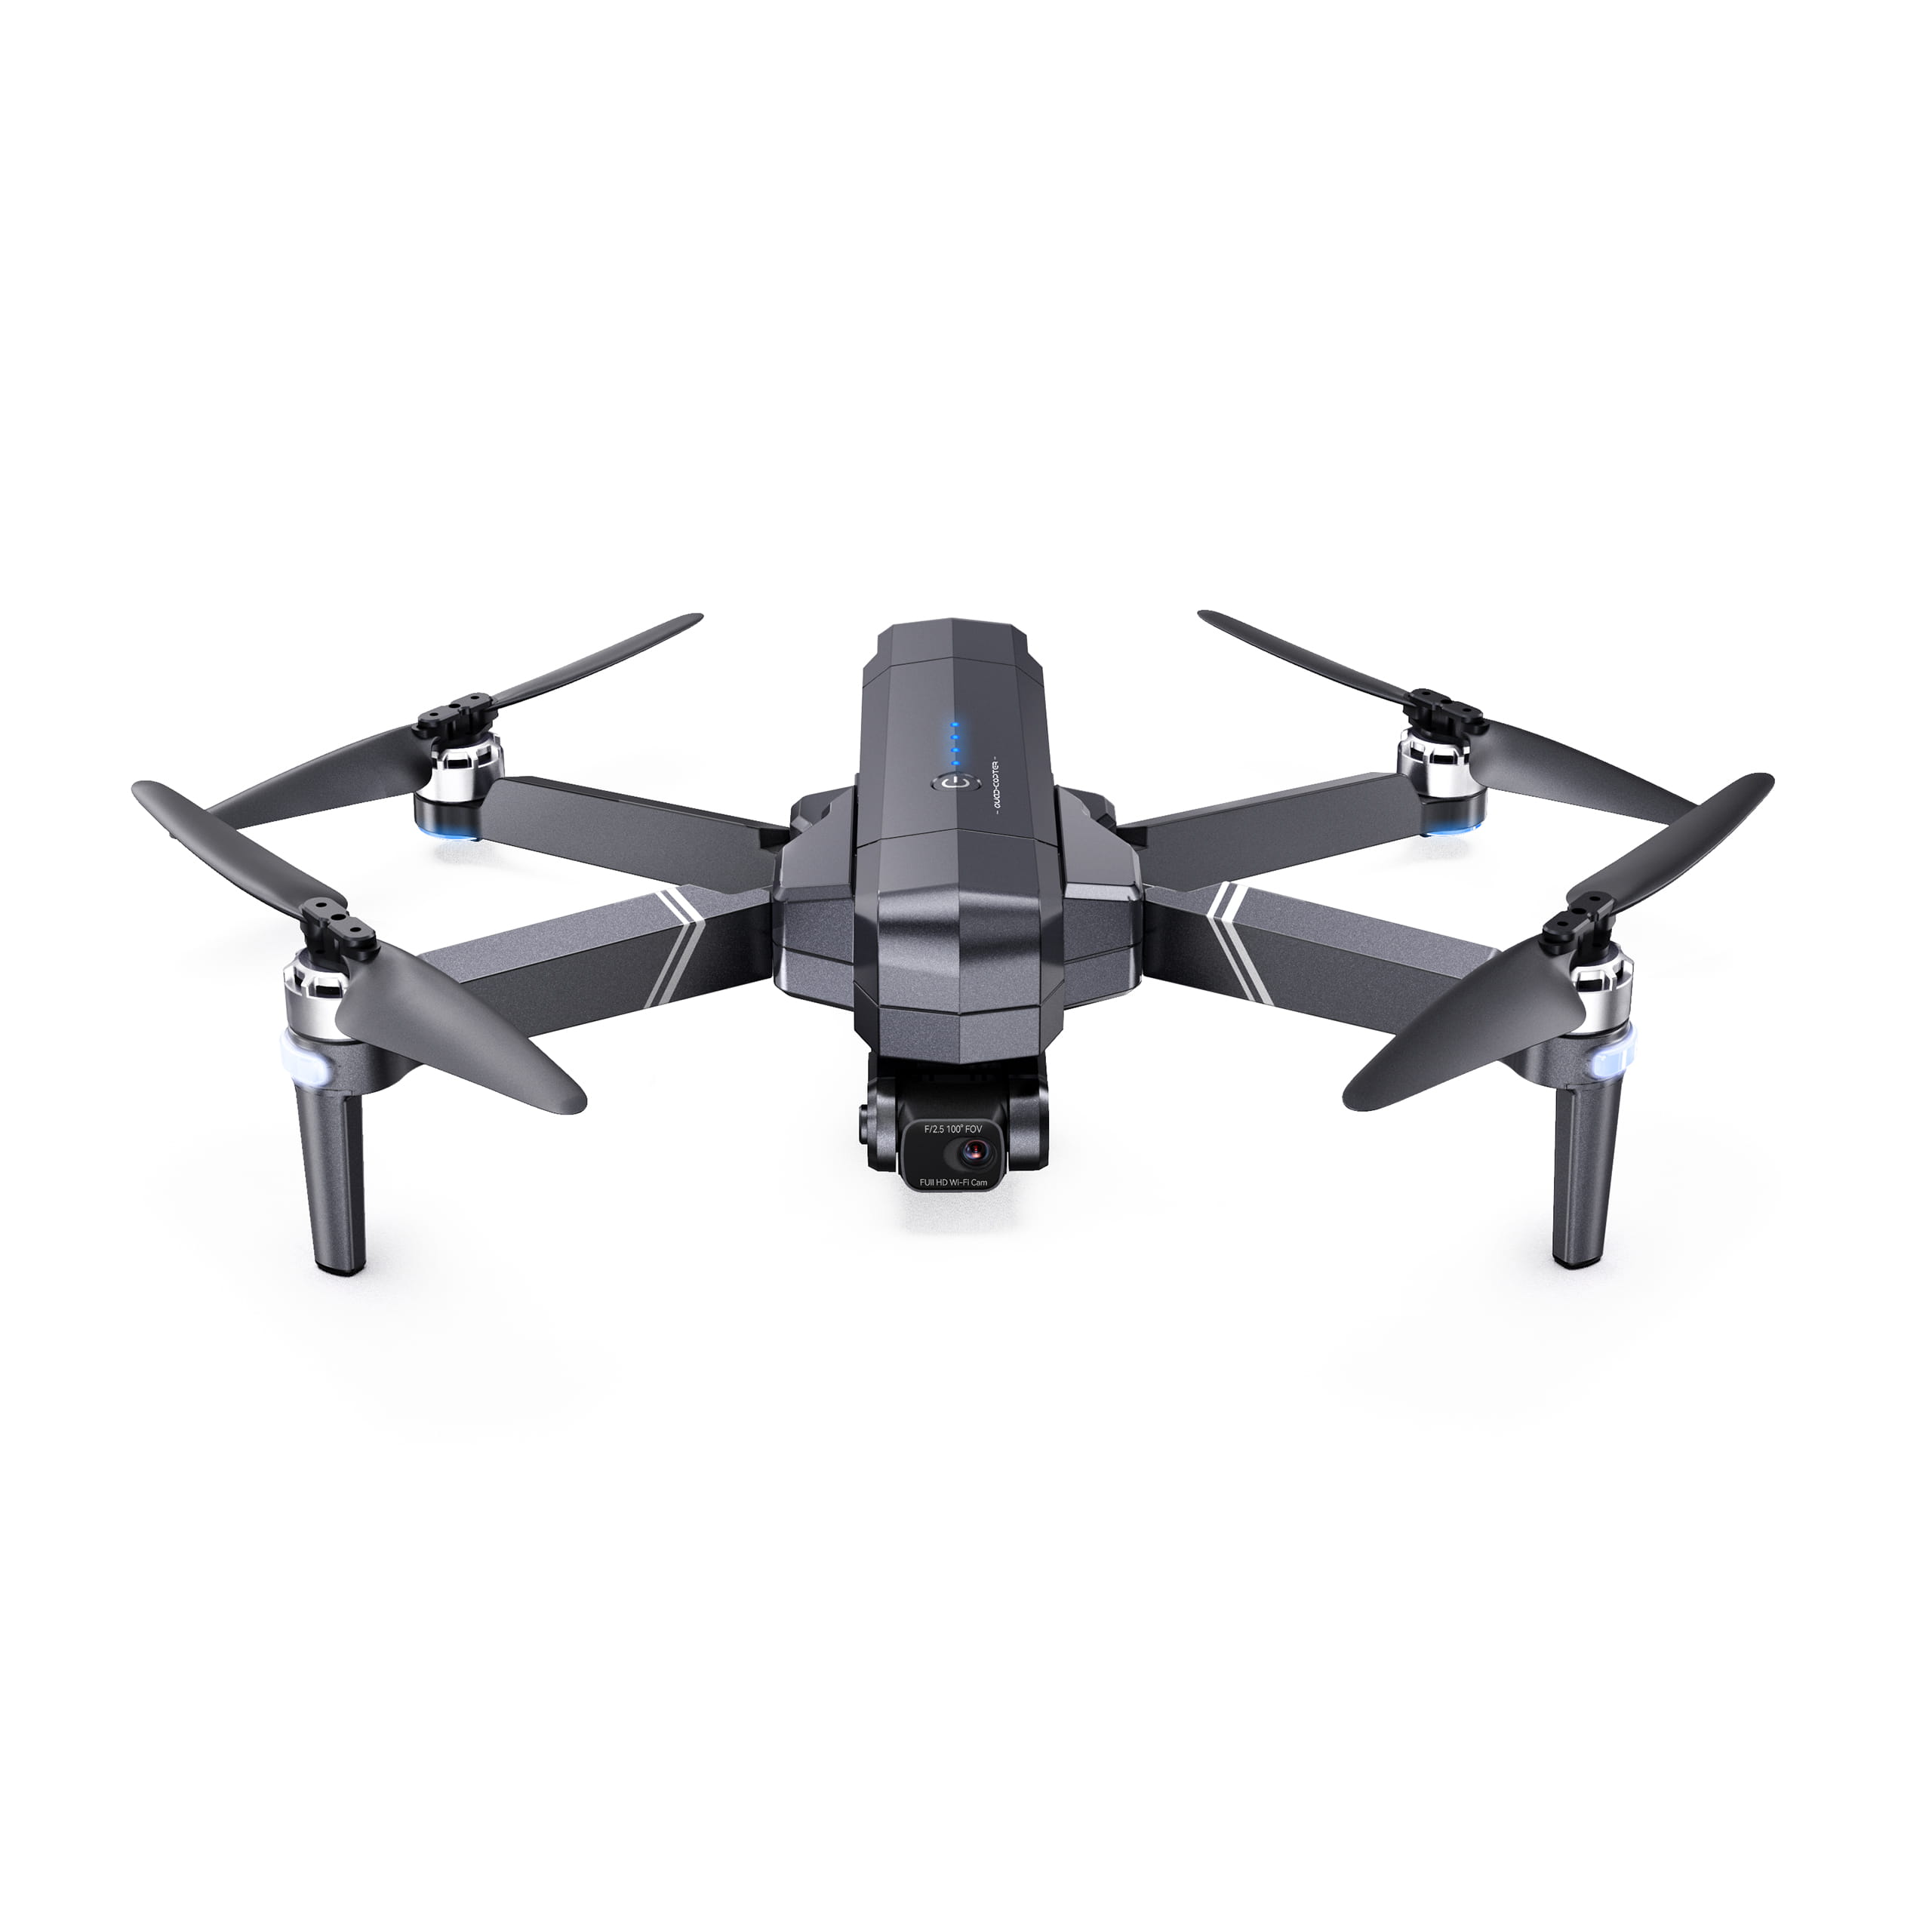 Ruko F11GIM2 4K gimbal camera drone review - See the world from above! -  The Gadgeteer